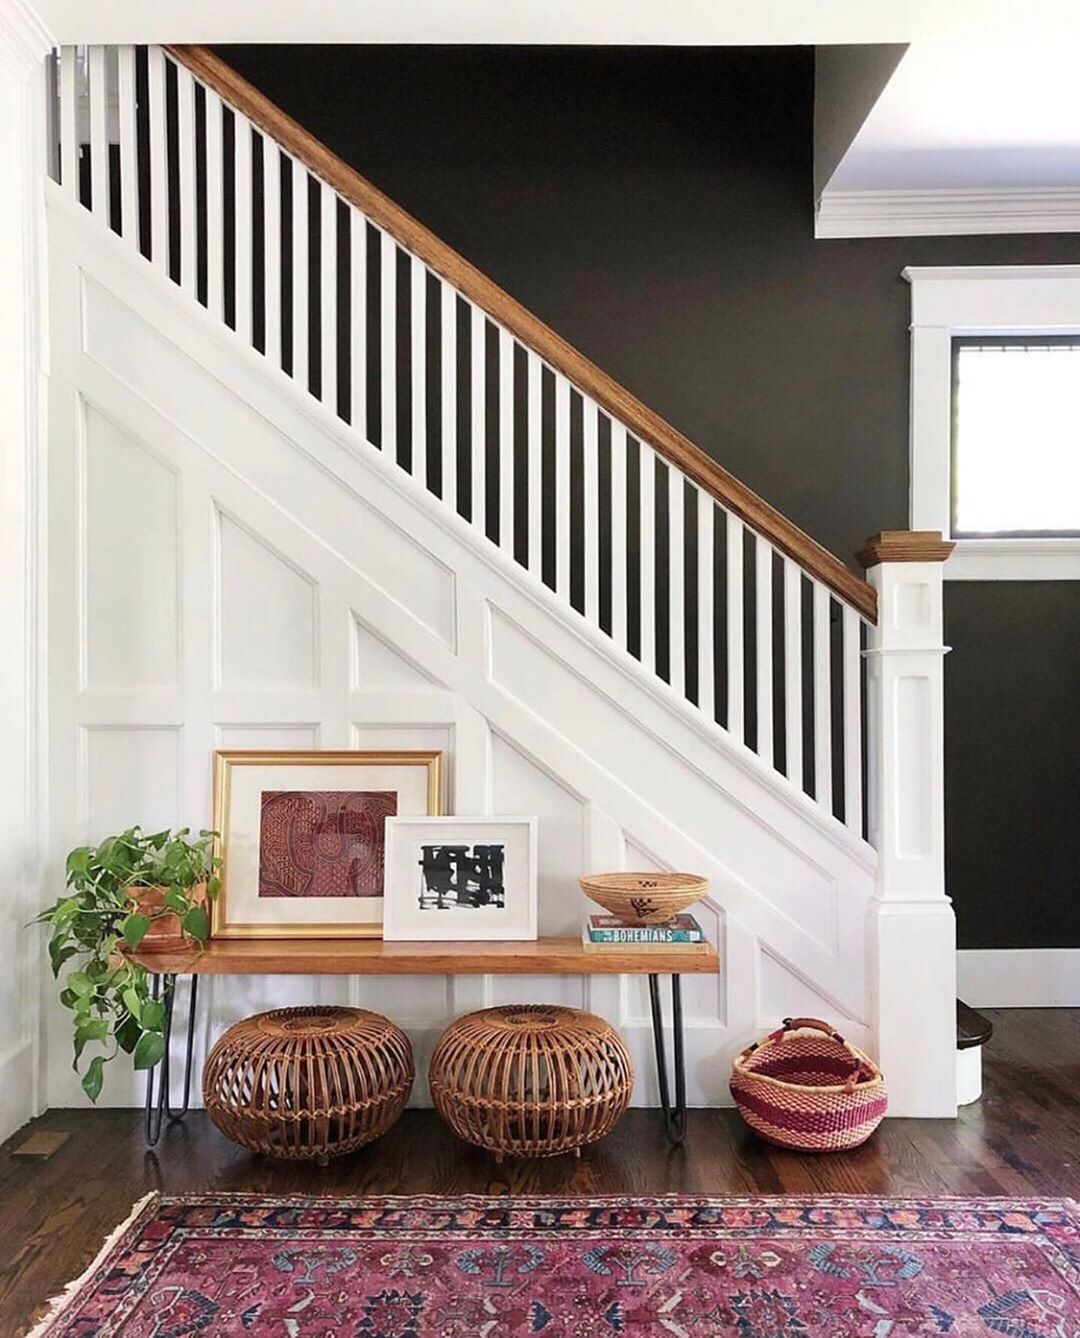 Staged entryway near stairs. Photo by Instagram user @staged4more